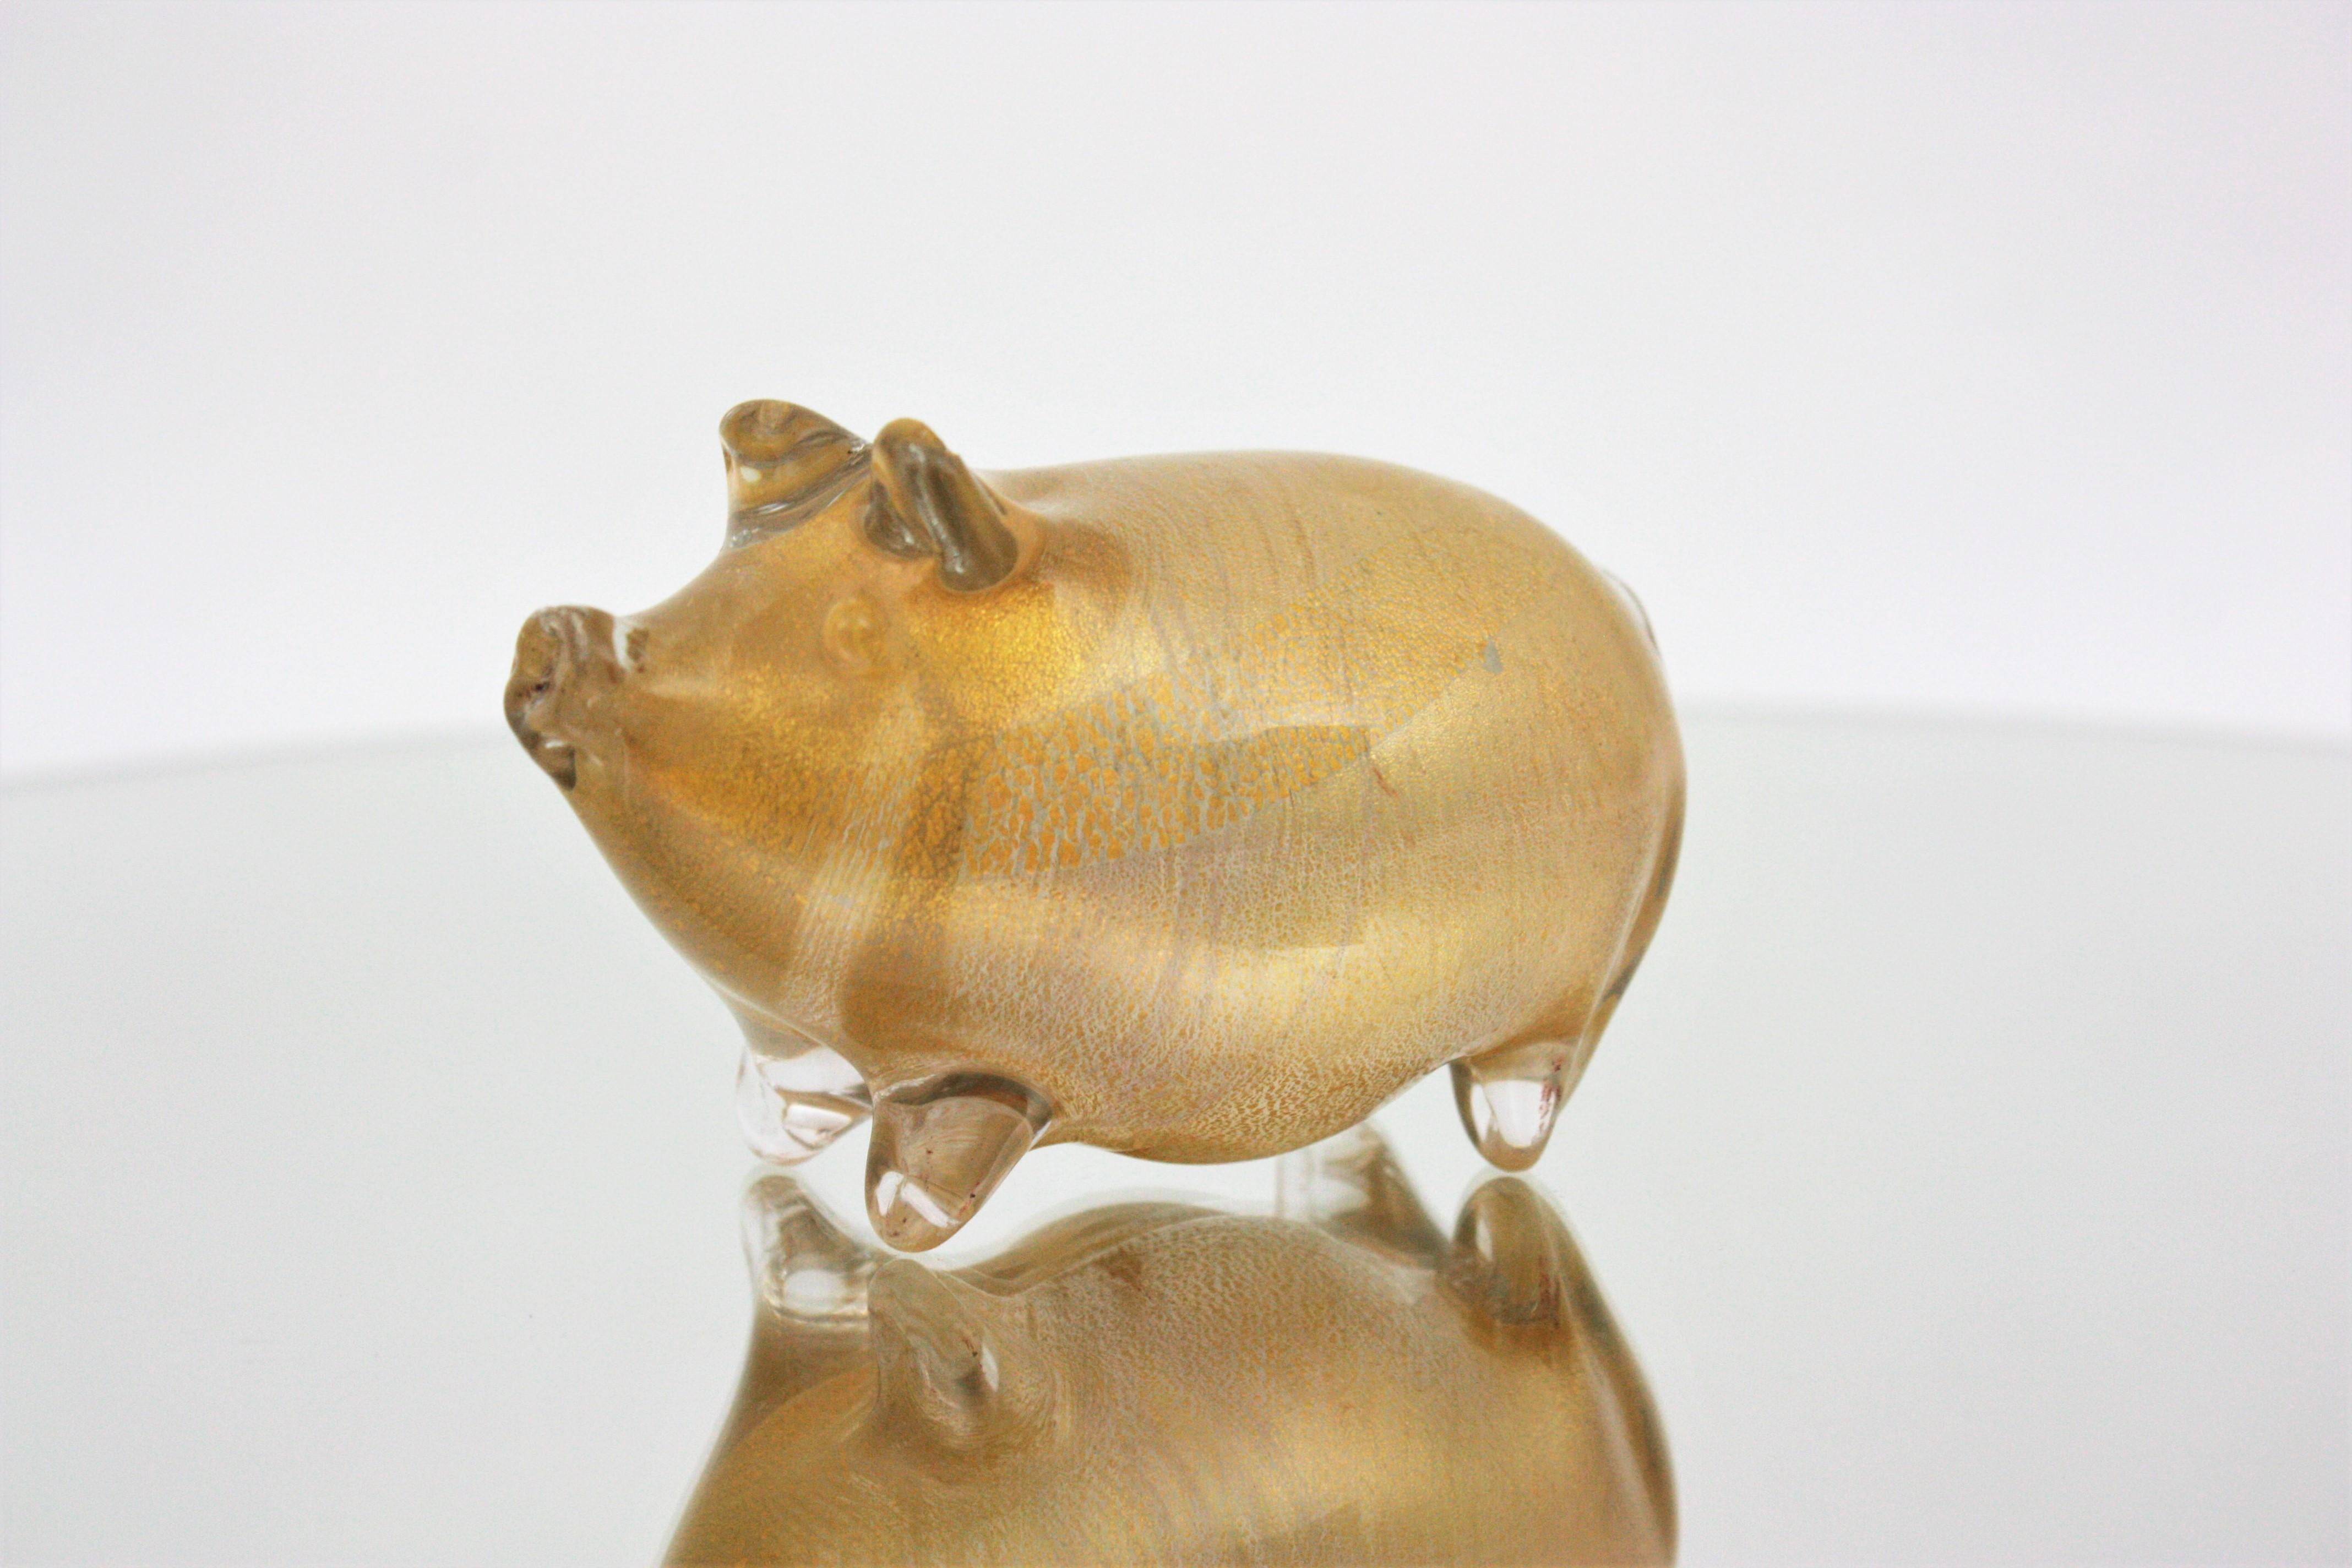 Eye-catching Gold Flecked Clear Murano Art Glass Little Pig Figure. Seguso Vetri d'Arte, Italy, 1950s.
This pig figurine sculpture is handcrafted in clear glass with Aventurine gold flecks inclussions thorough.
Interesting for collectors and